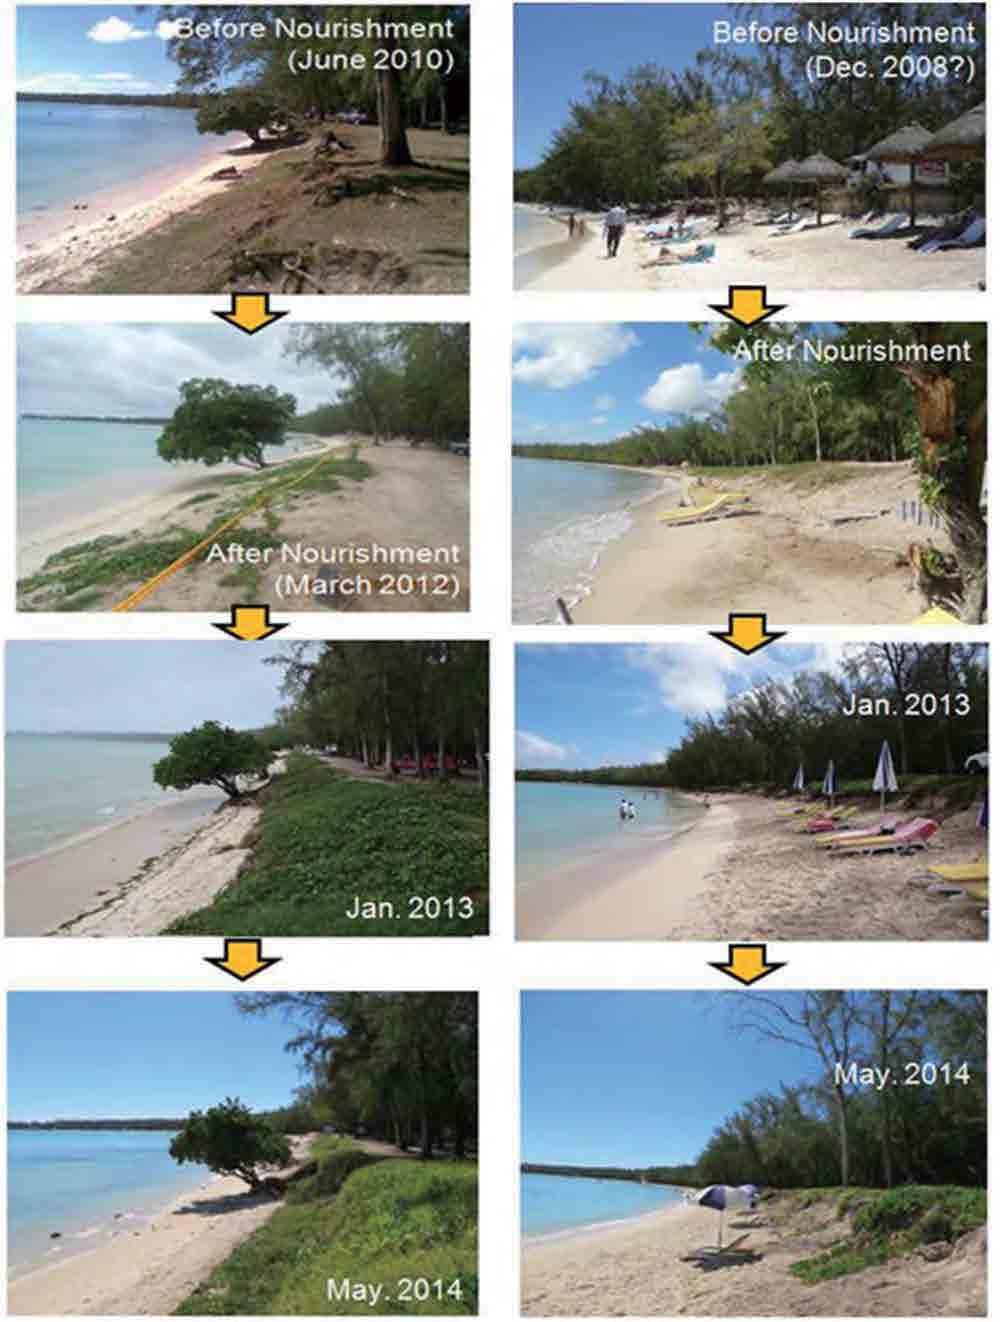 during storm season in 2012, most of the nourishment sand has been scattered and the beach has returned to almost the same condition as previously, as shown in Figure 3.